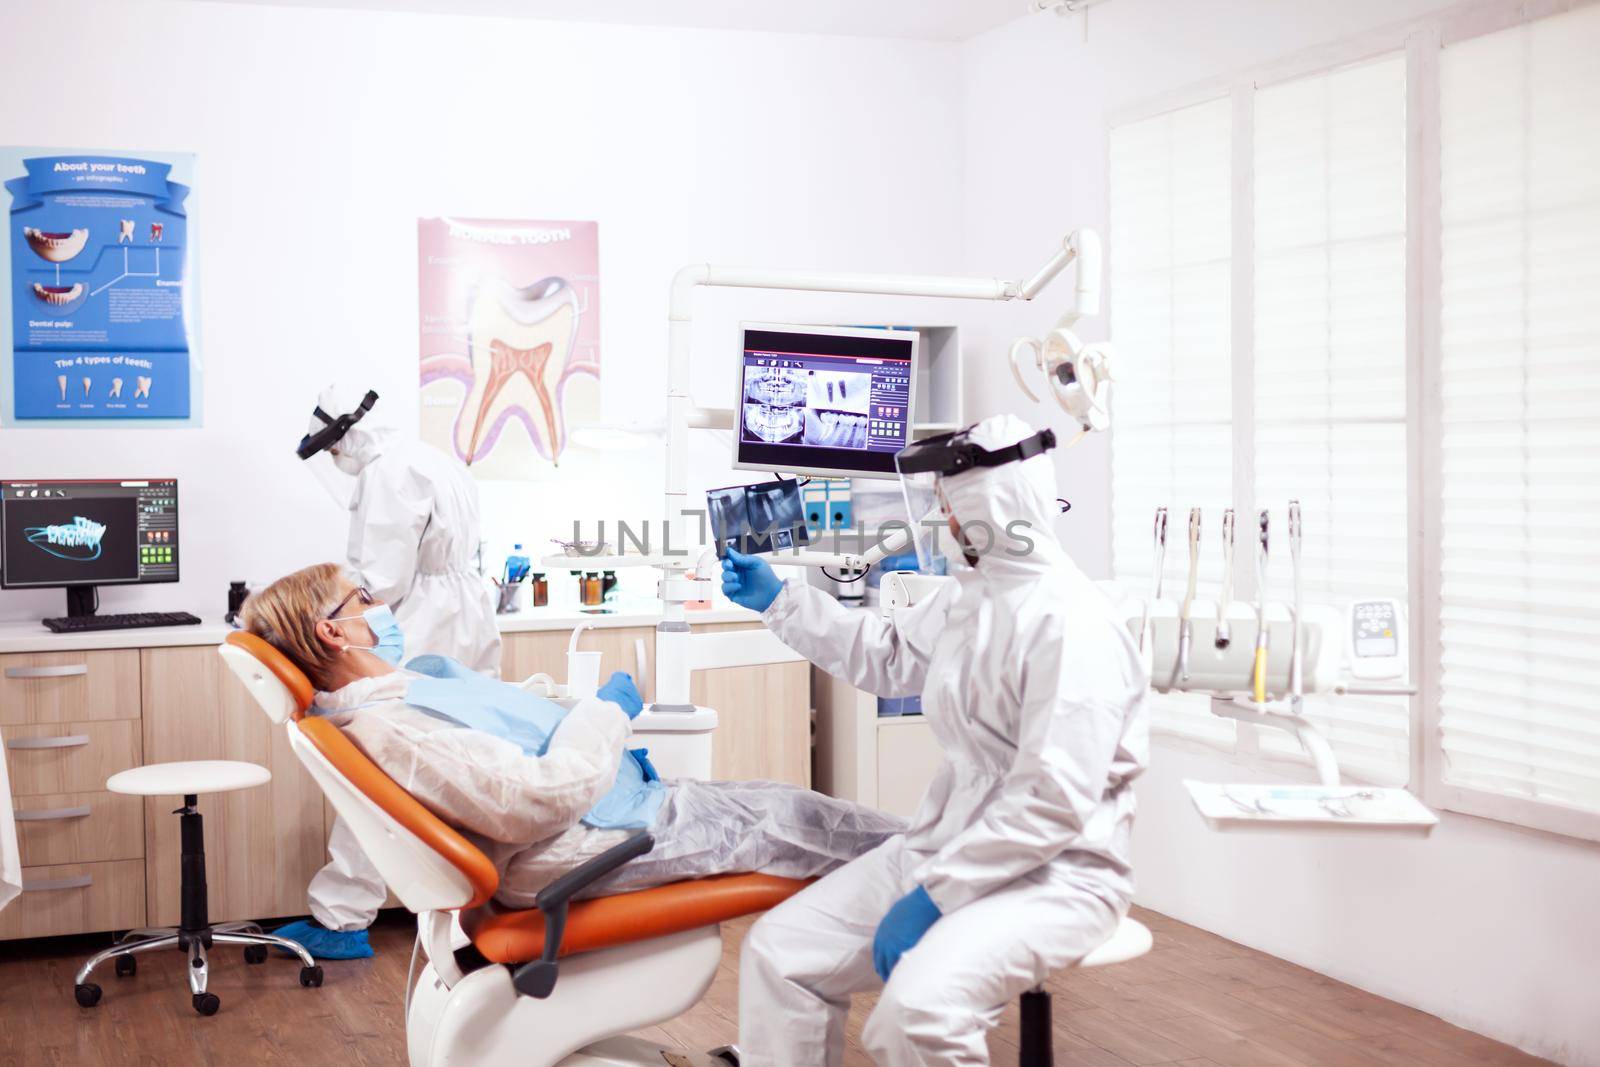 Dentist in protective gear agasint coroanvirus holding patient x-ray by DCStudio